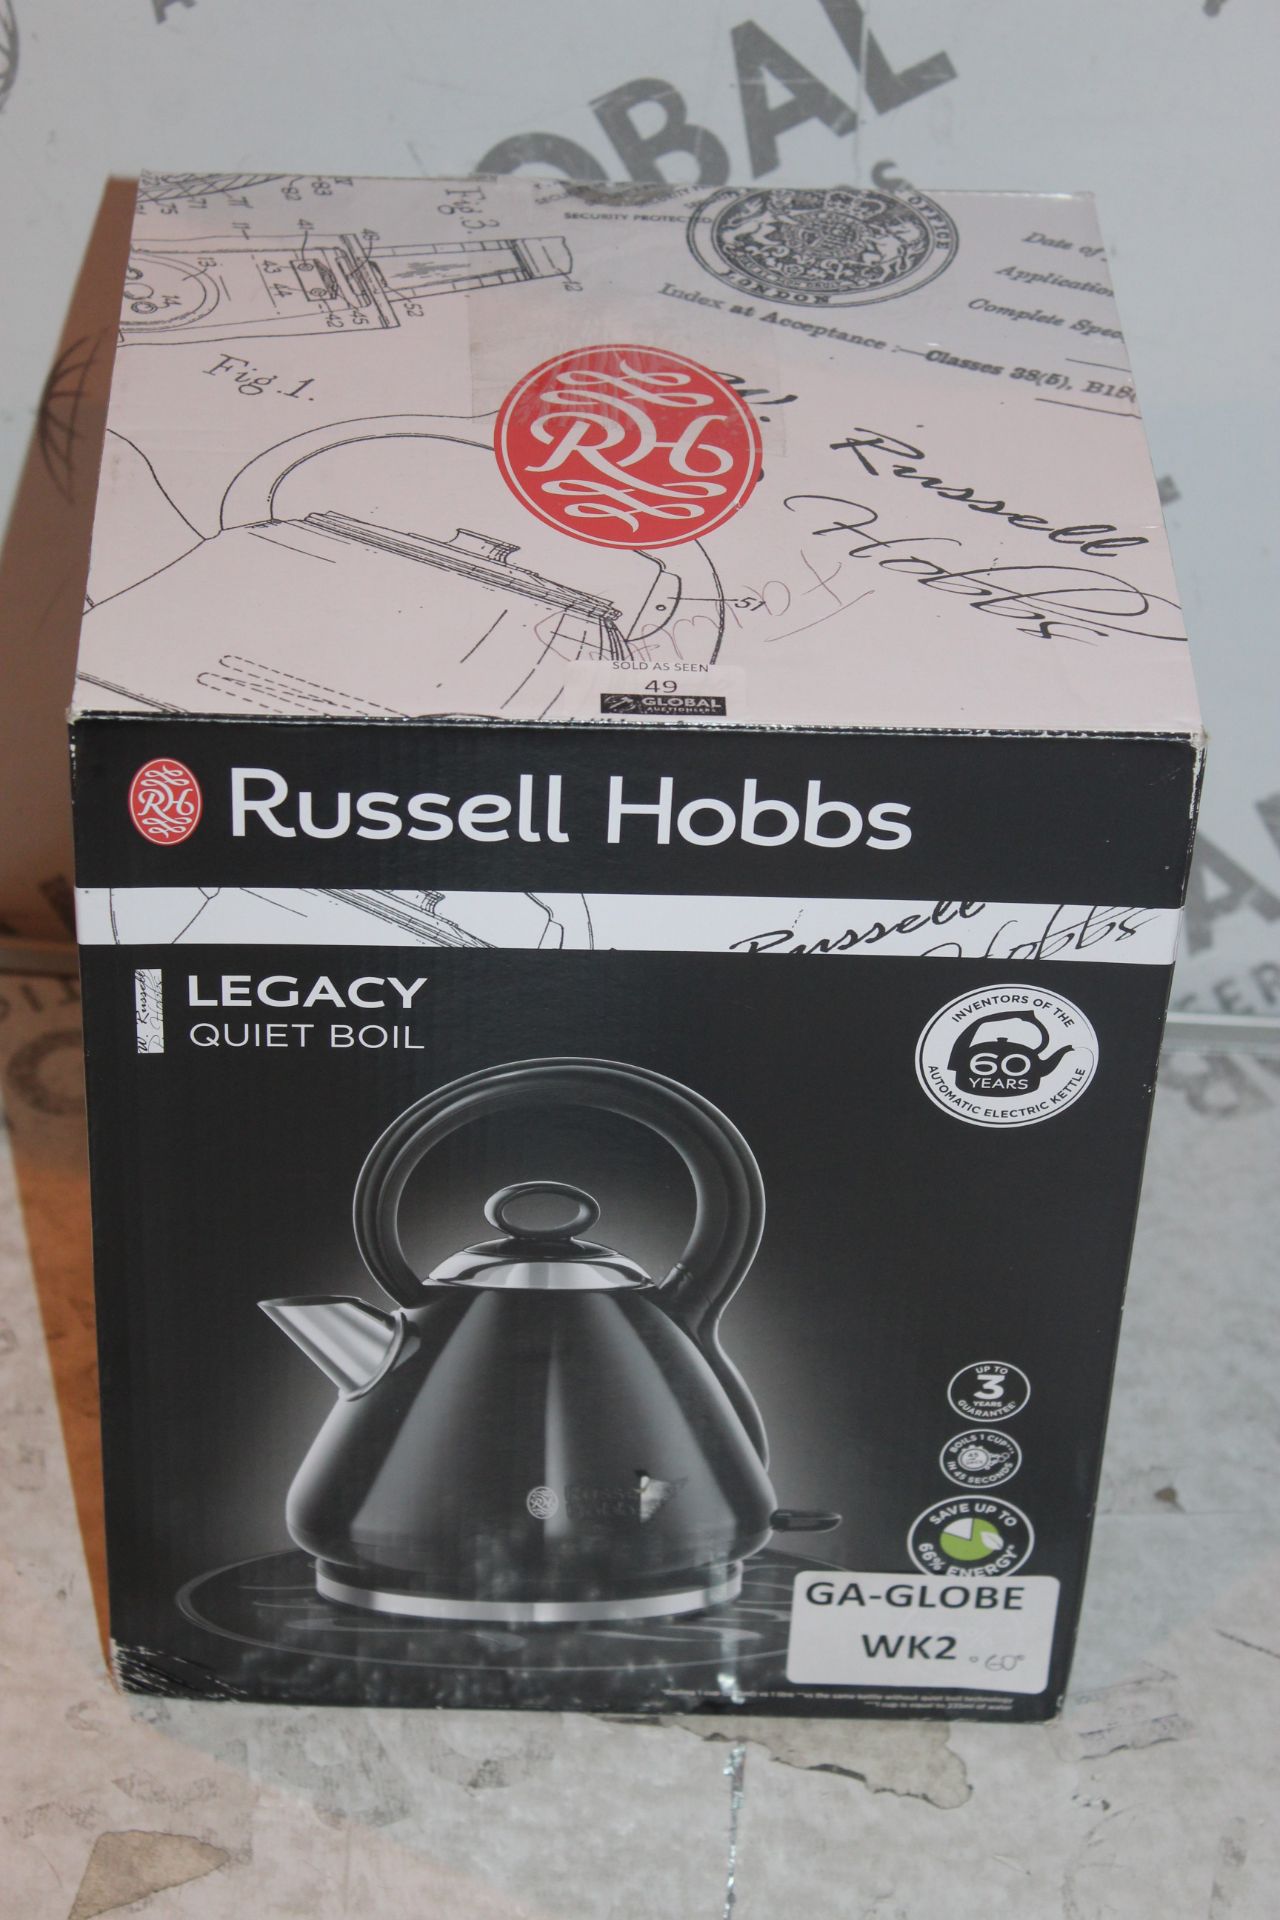 Boxed Russell Hobbs Legacy Boil Kettle RRP £60 (Untested/Customer Returns)